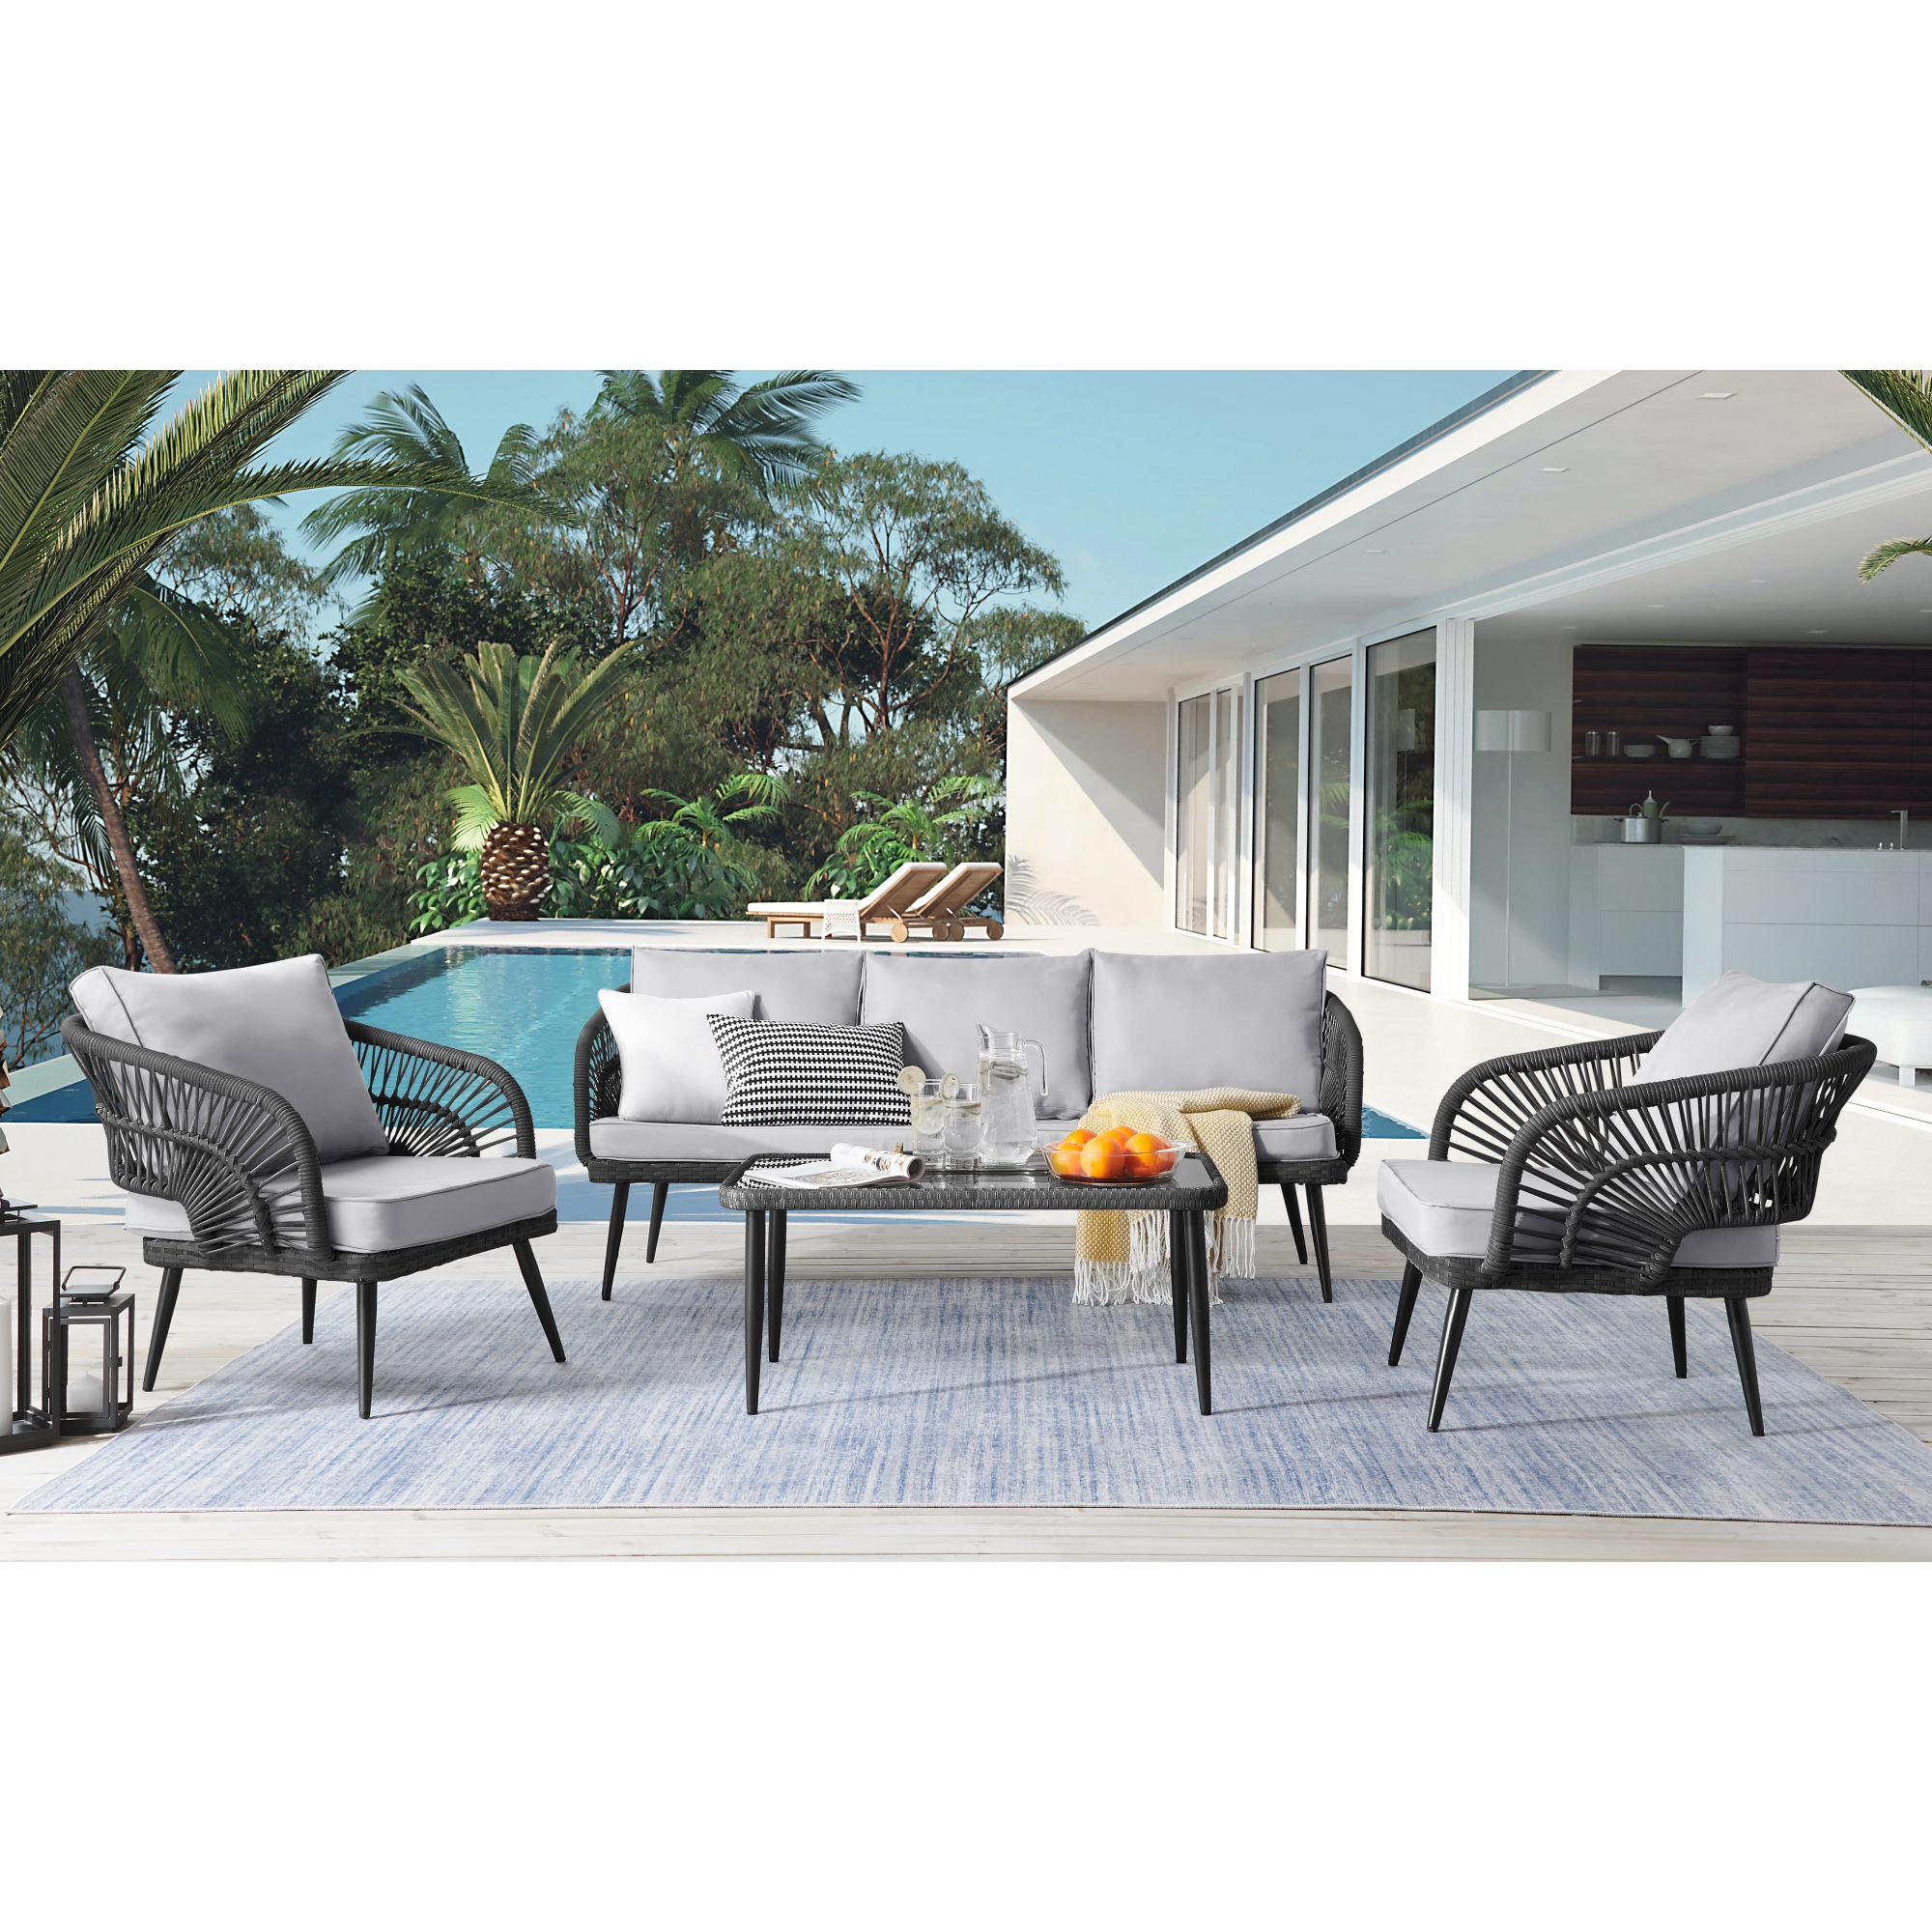 Inspired Home Sylis Outdoor 4pc Seating Group Set: 1 Sofa,2 Armchairs,1 Coffee Table,Rattan,Washable Cushions,UV Resistant,Black